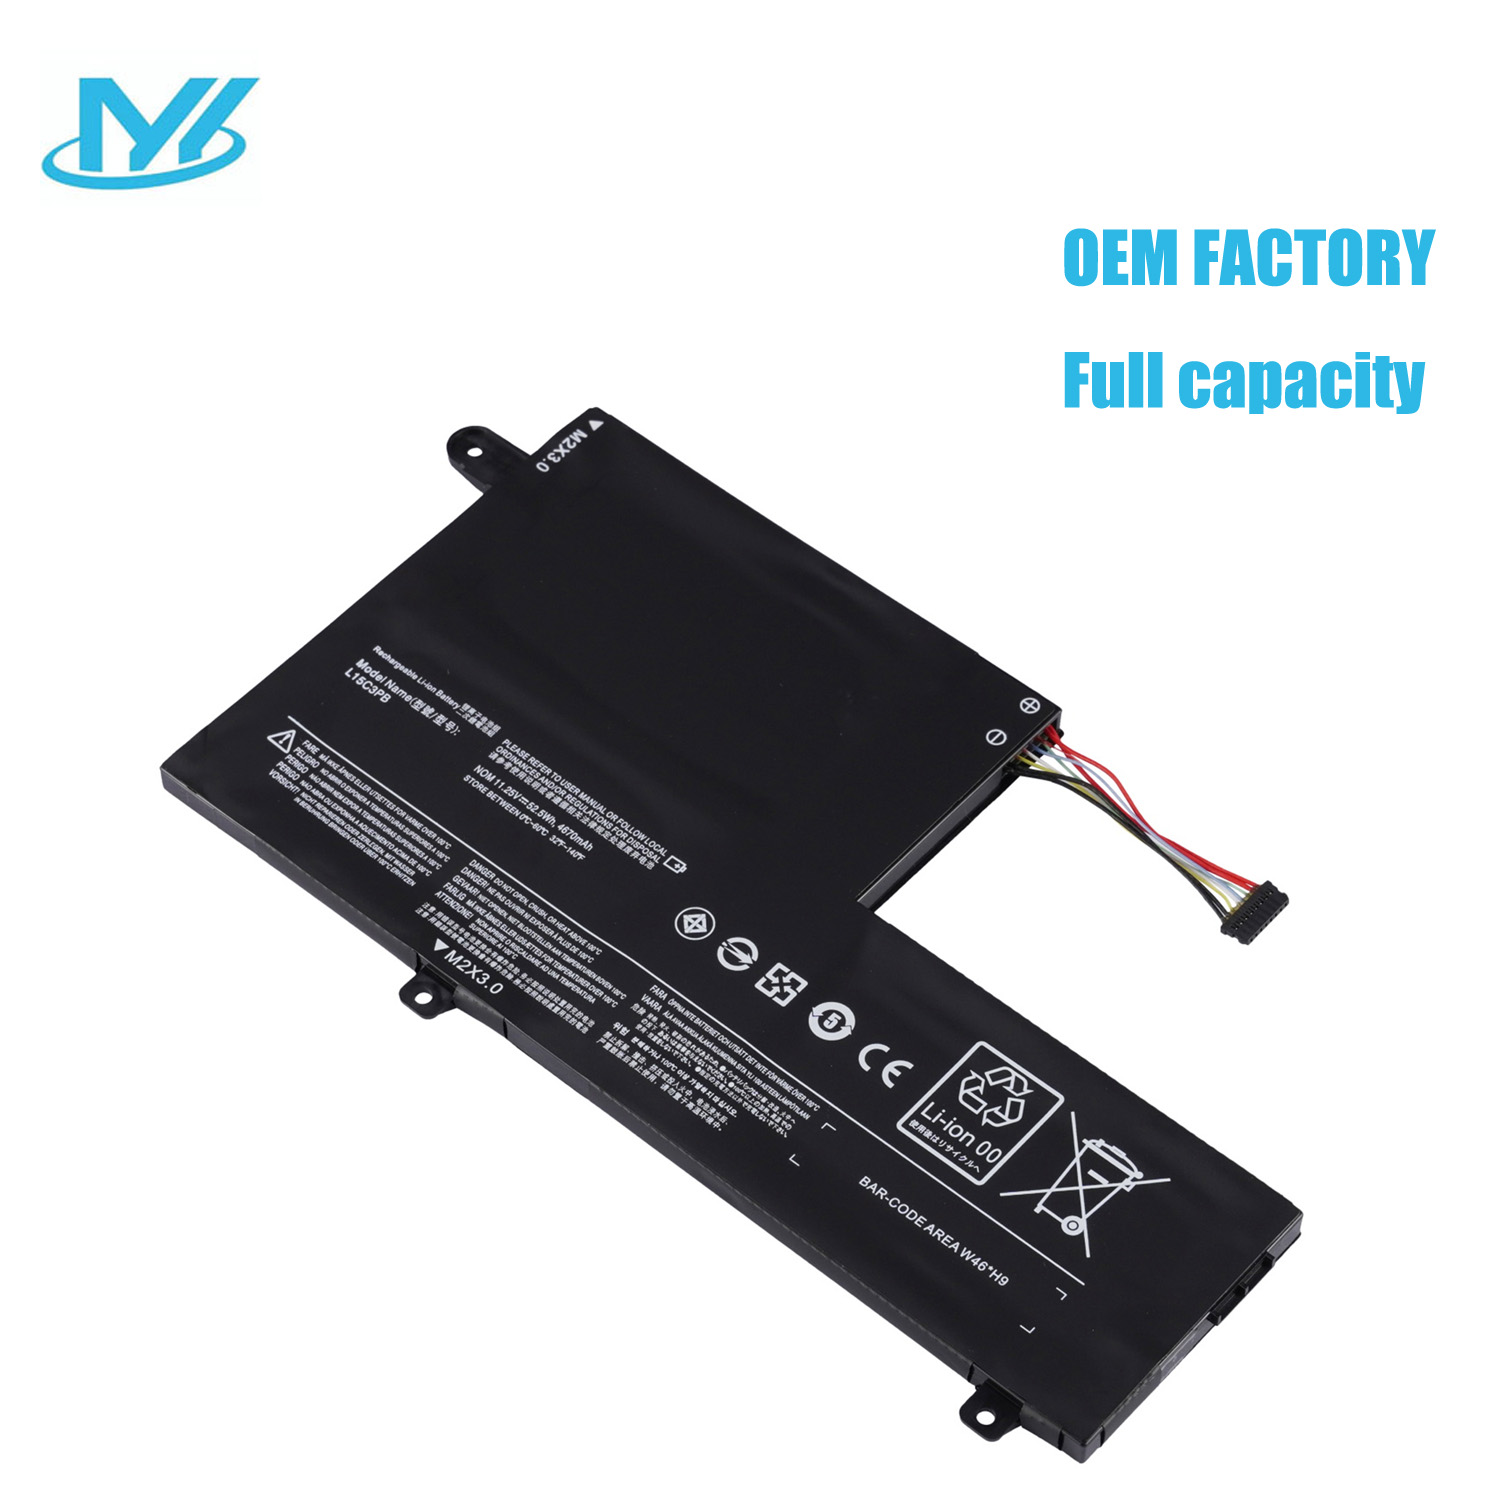 L15C3PB1 rechargeable lithium ion Notebook battery Laptop battery For with Lenovo FLEX3 FLEX4-1580 320S-15AST 320S-15IKB 11.25V 52.5WH 4670MAH